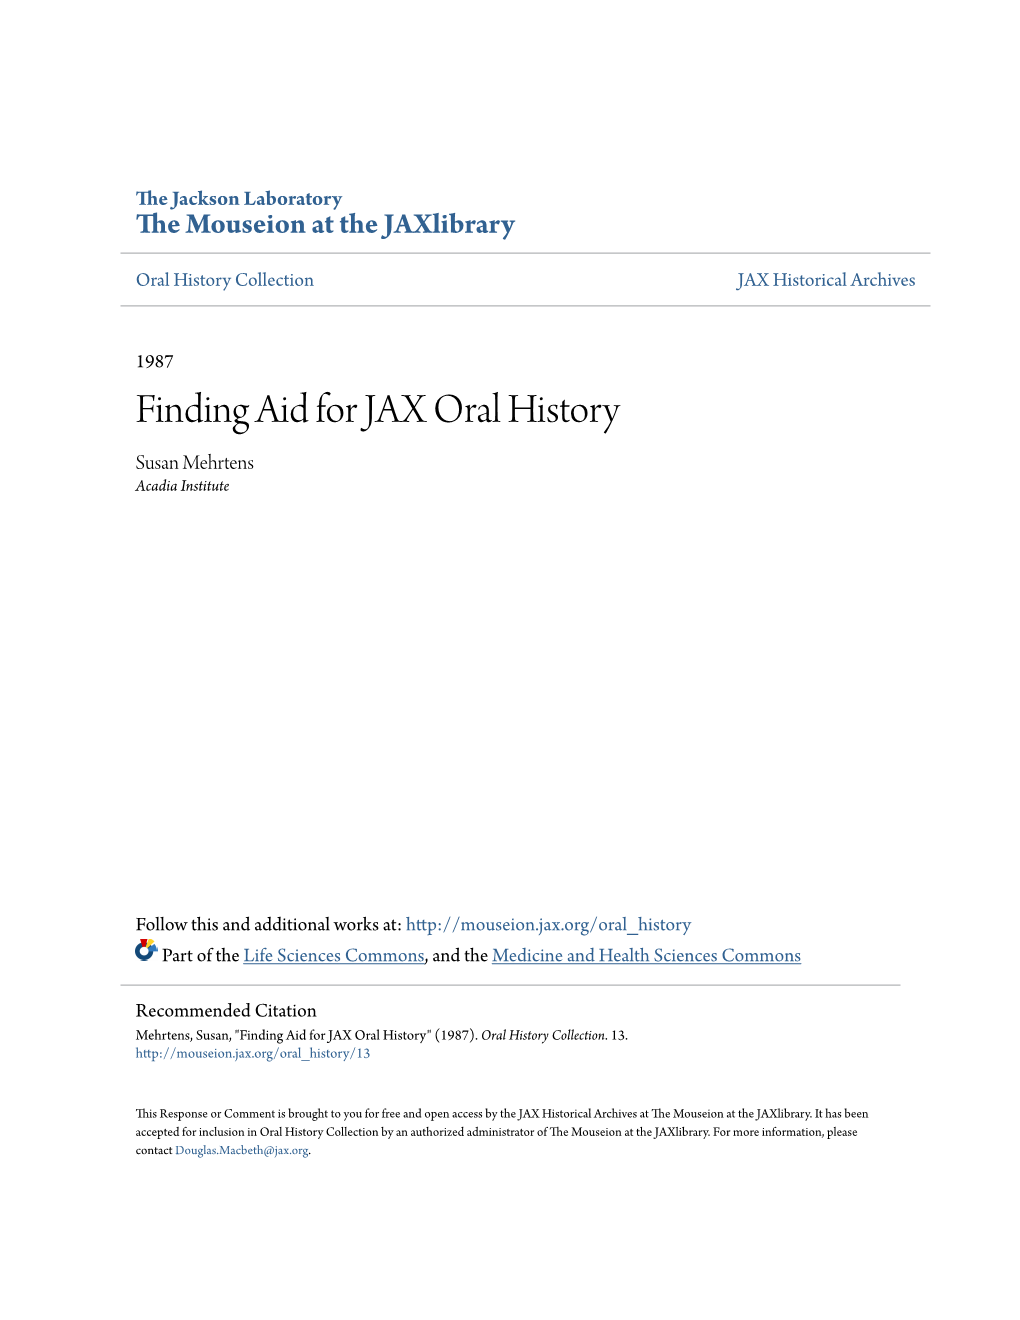 Finding Aid for JAX Oral History Susan Mehrtens Acadia Institute